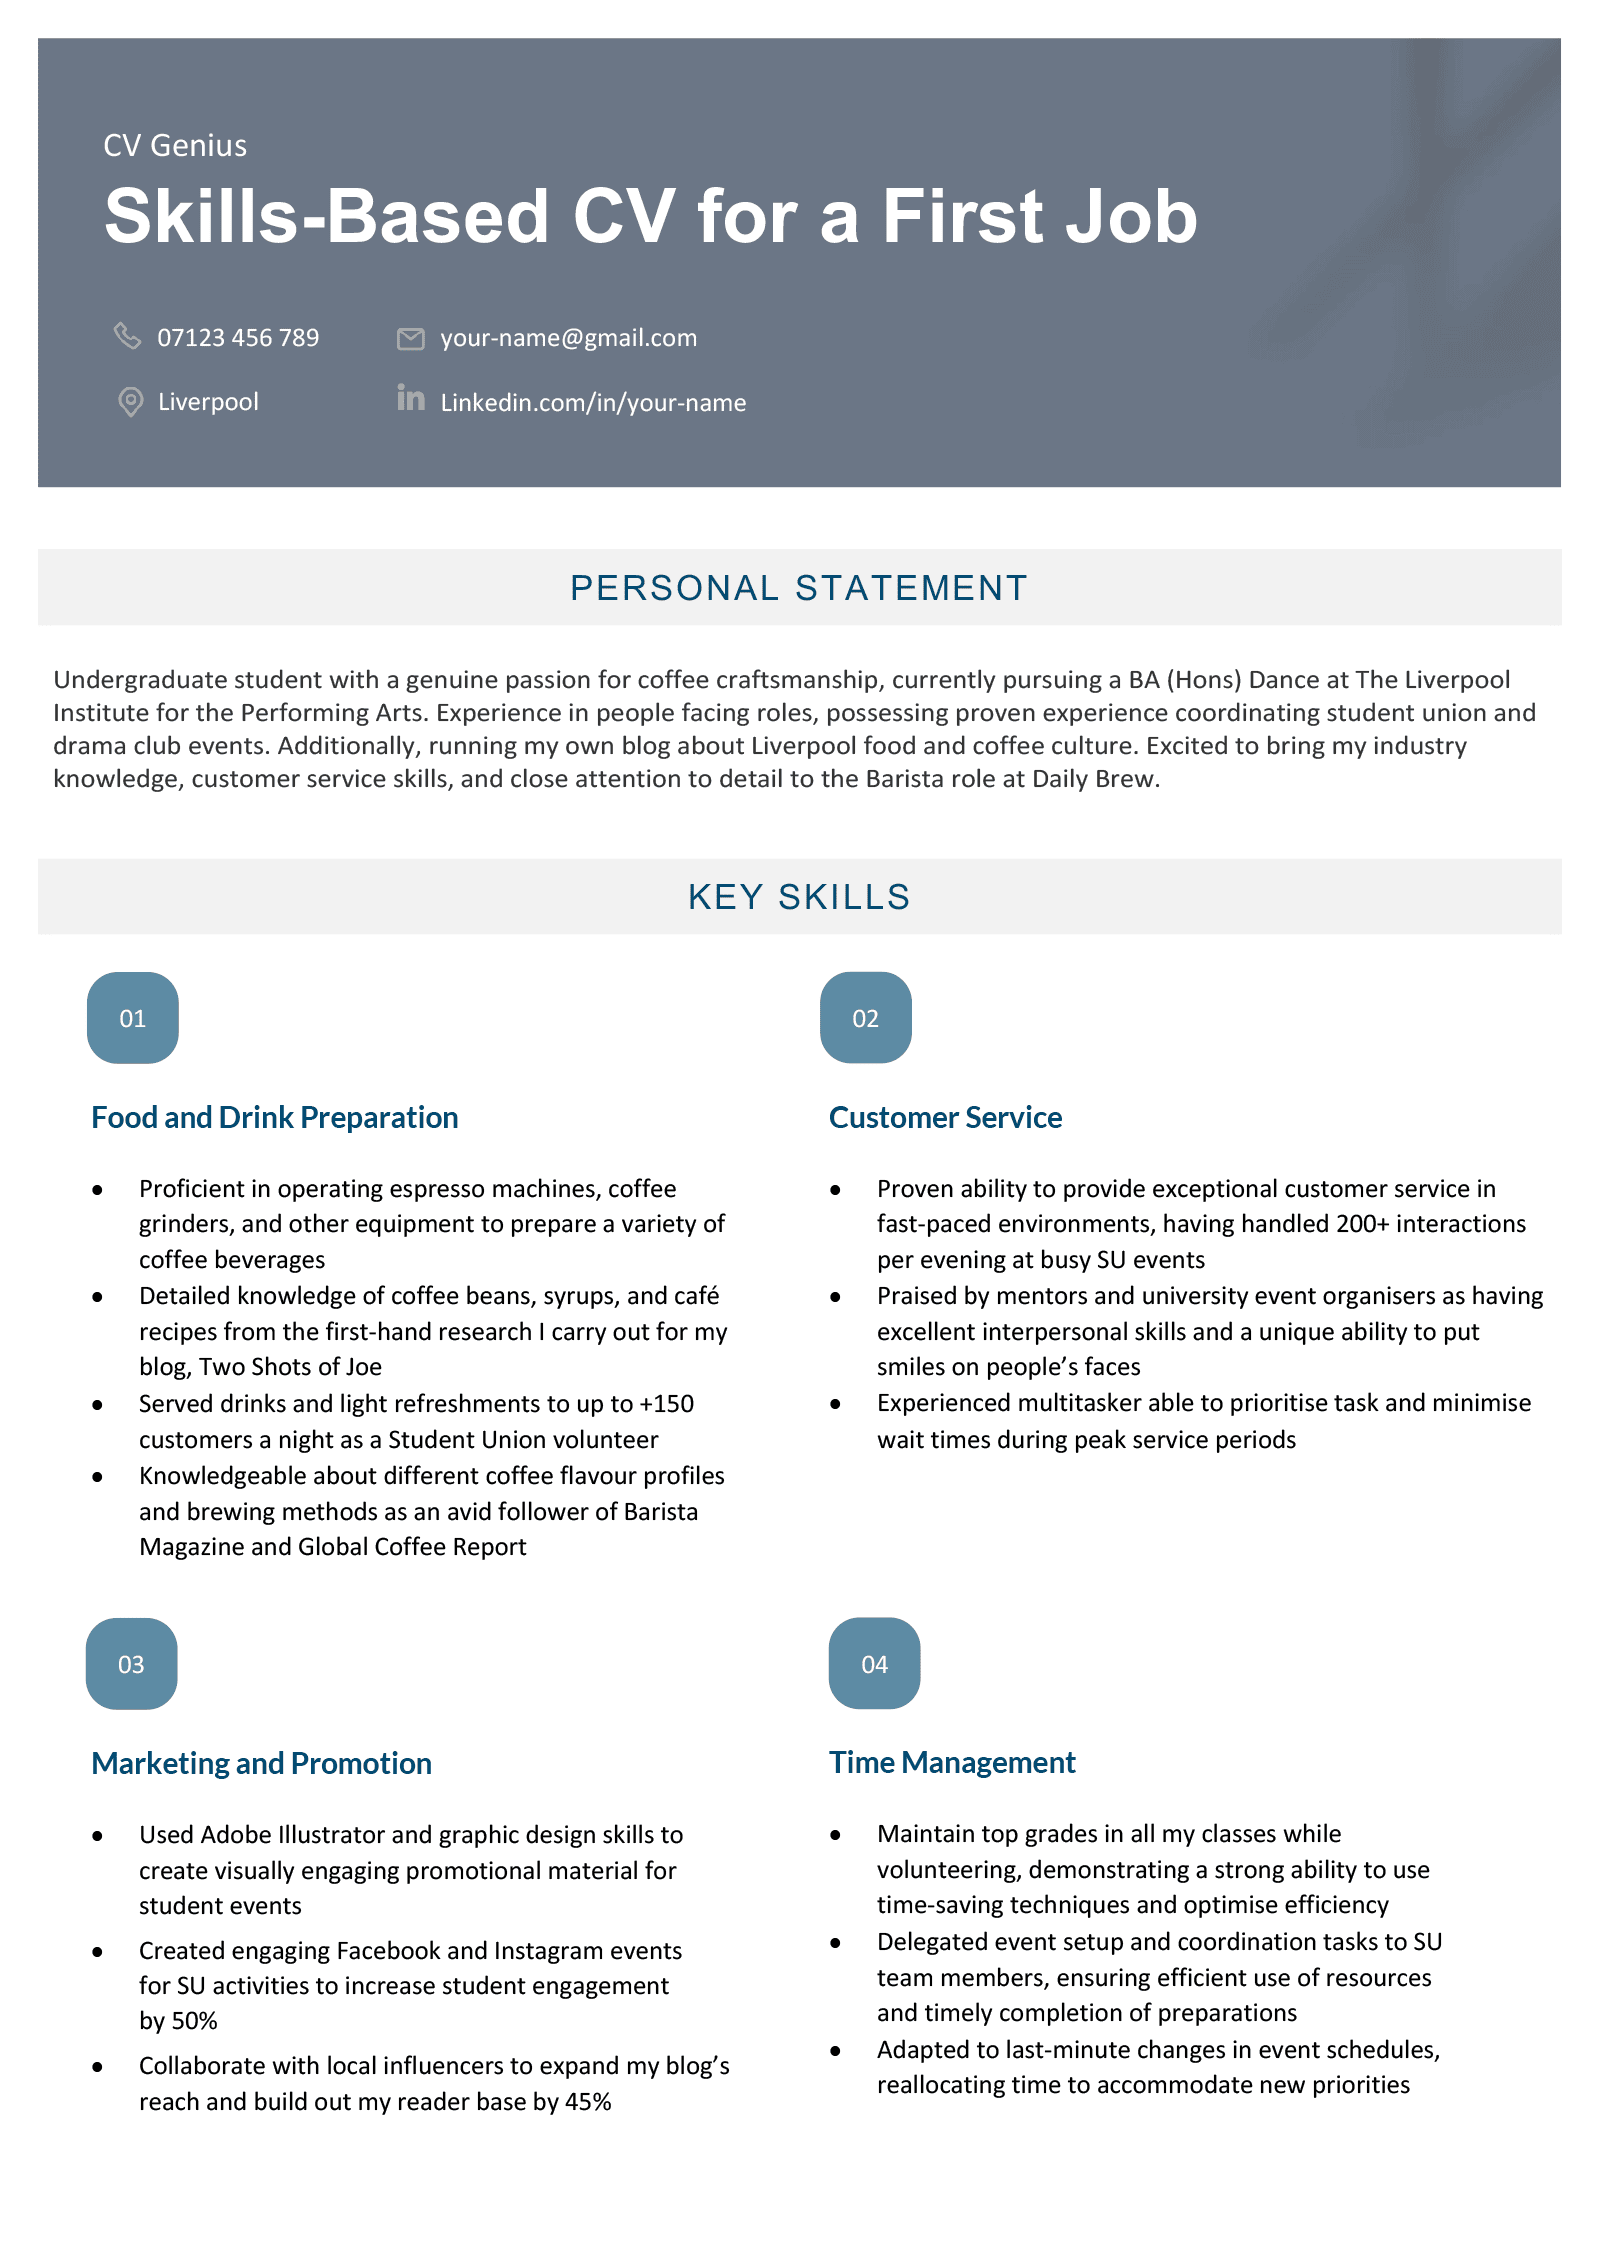 A CV for a first job that uses a skills-based format and has a modern, blue header.